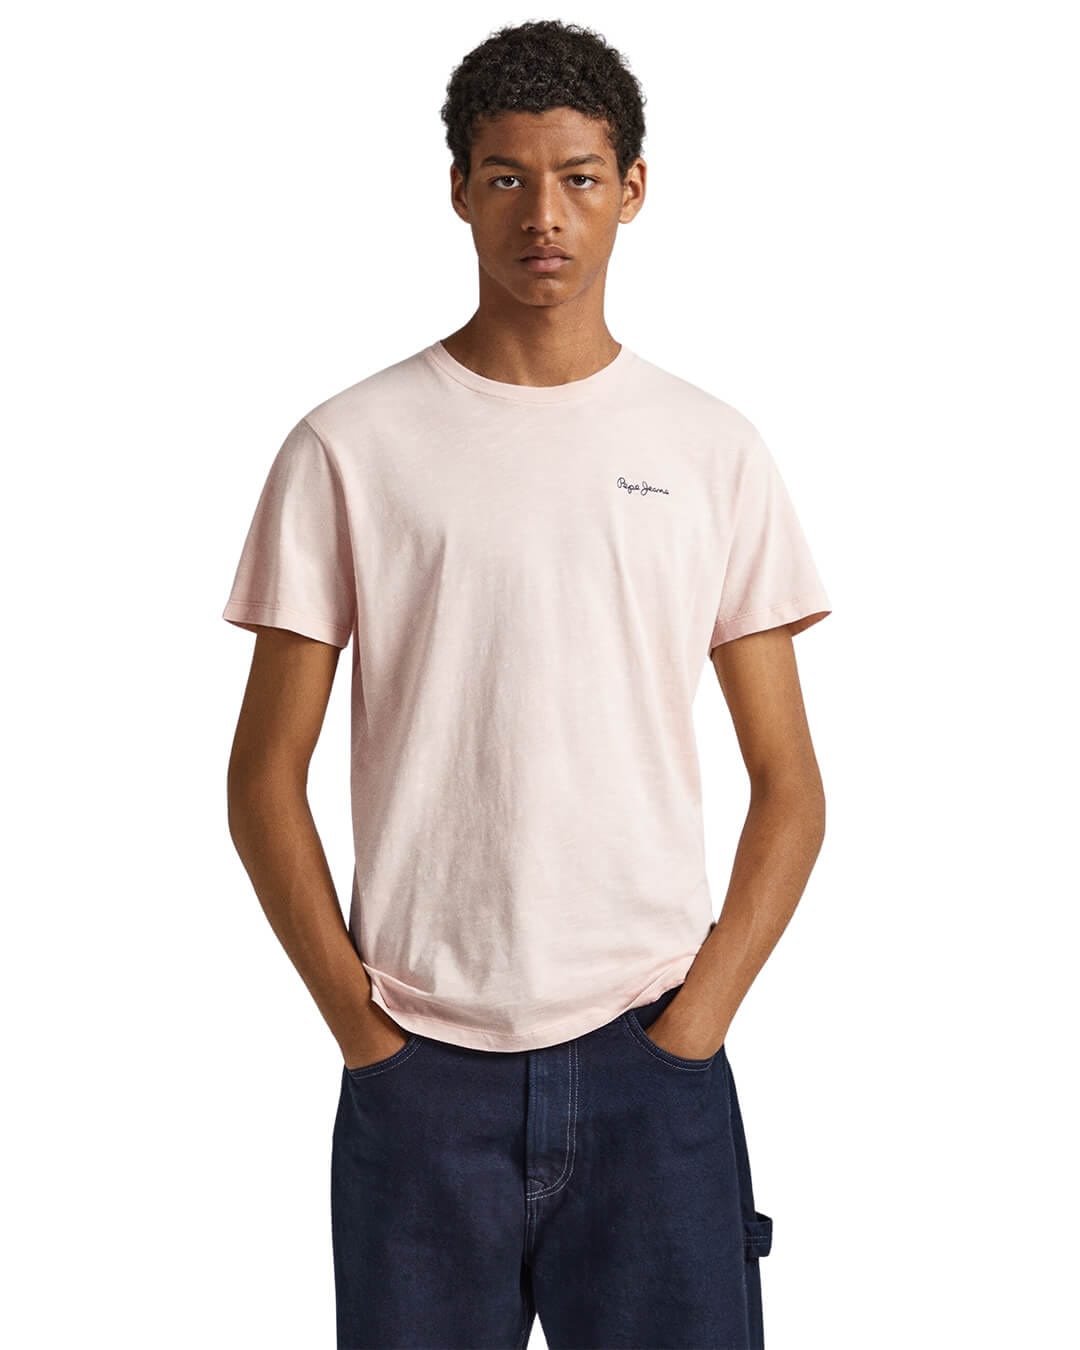 Pepe Jeans T-Shirts Pepe Jeans Wiltshirte Pink T-Shirt